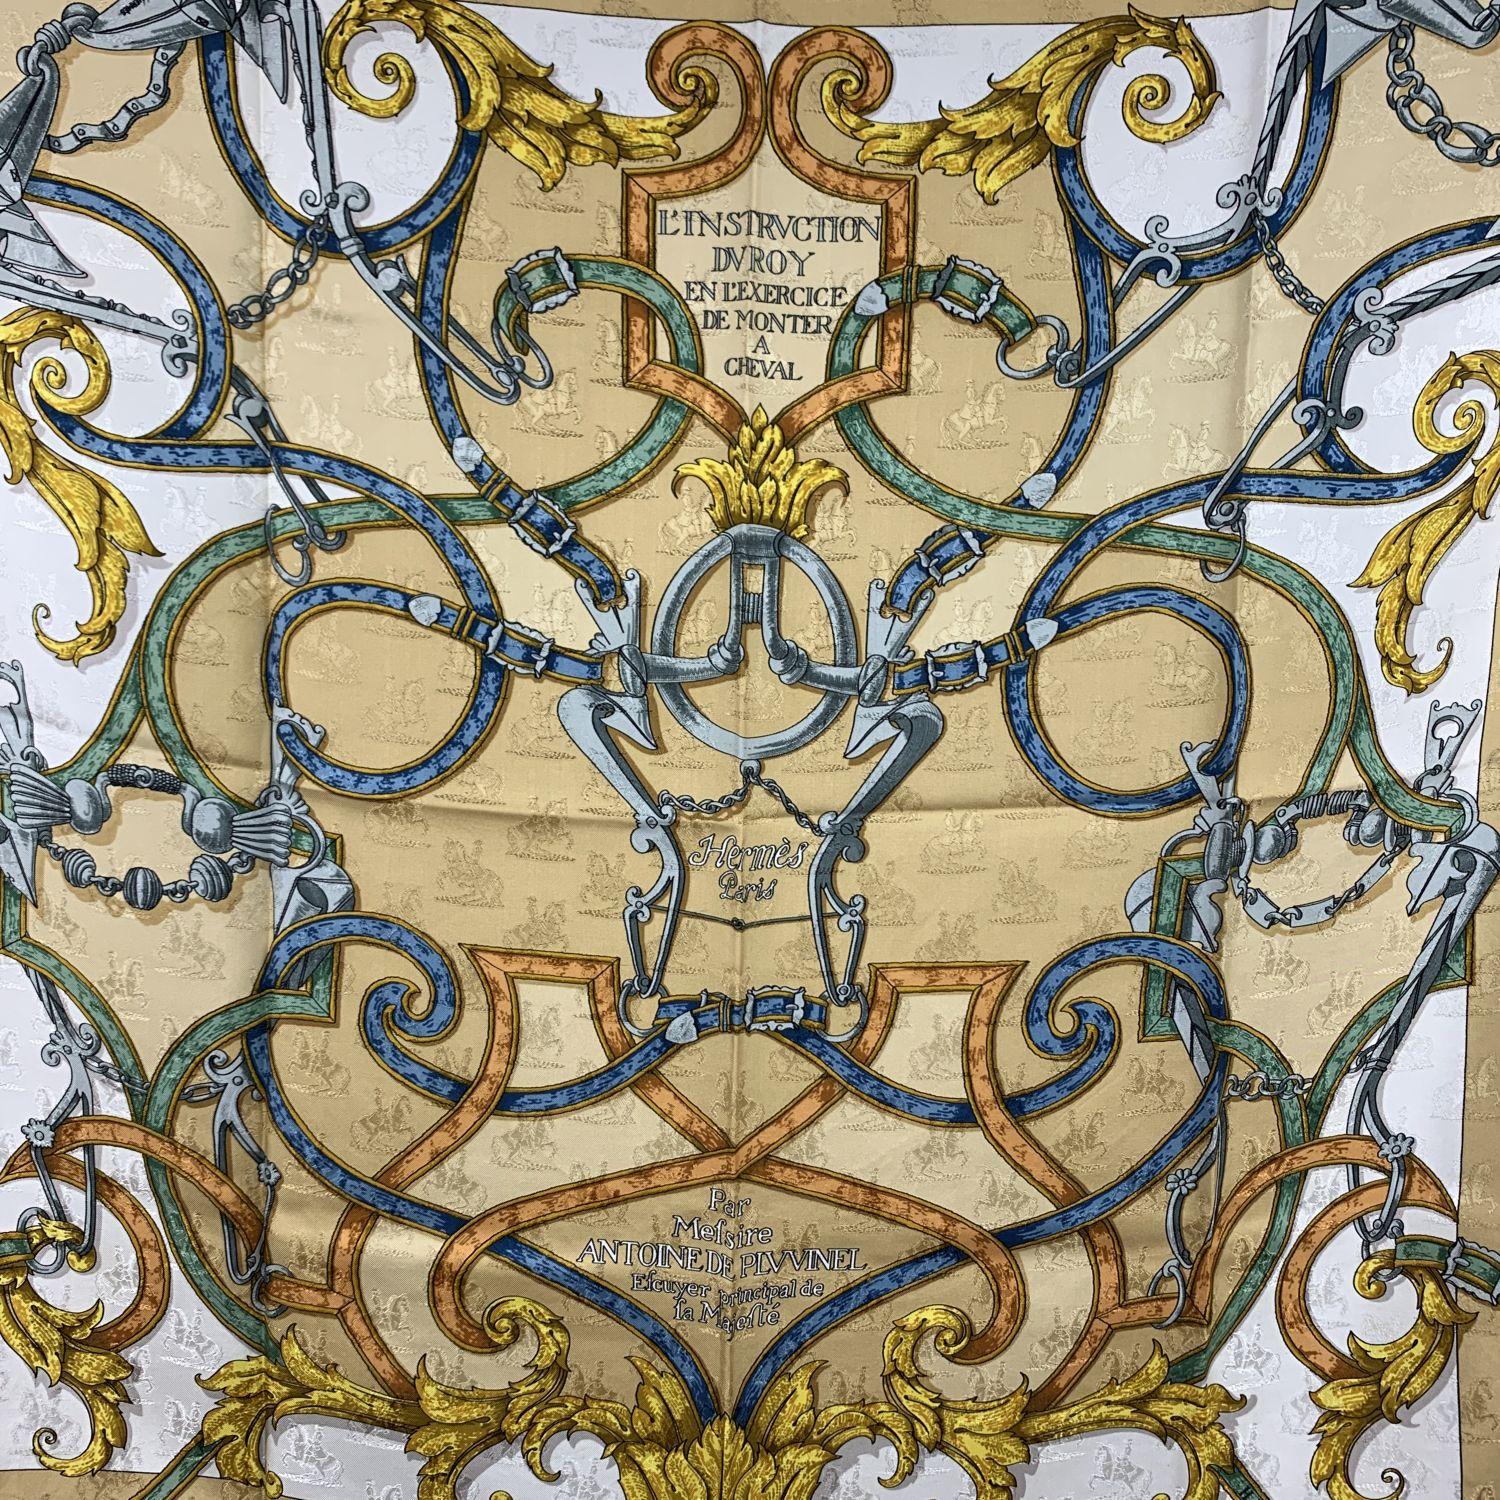 HERMES silk scarf named 'L'Instruction du Roy (en l'Exercice de Monter a Cheval)', by Henri d'Origny designed - first issued in 1993. 100% Jacquard Silk. The title and the idea for the design of this scarf derive from an ancient book, entitled 